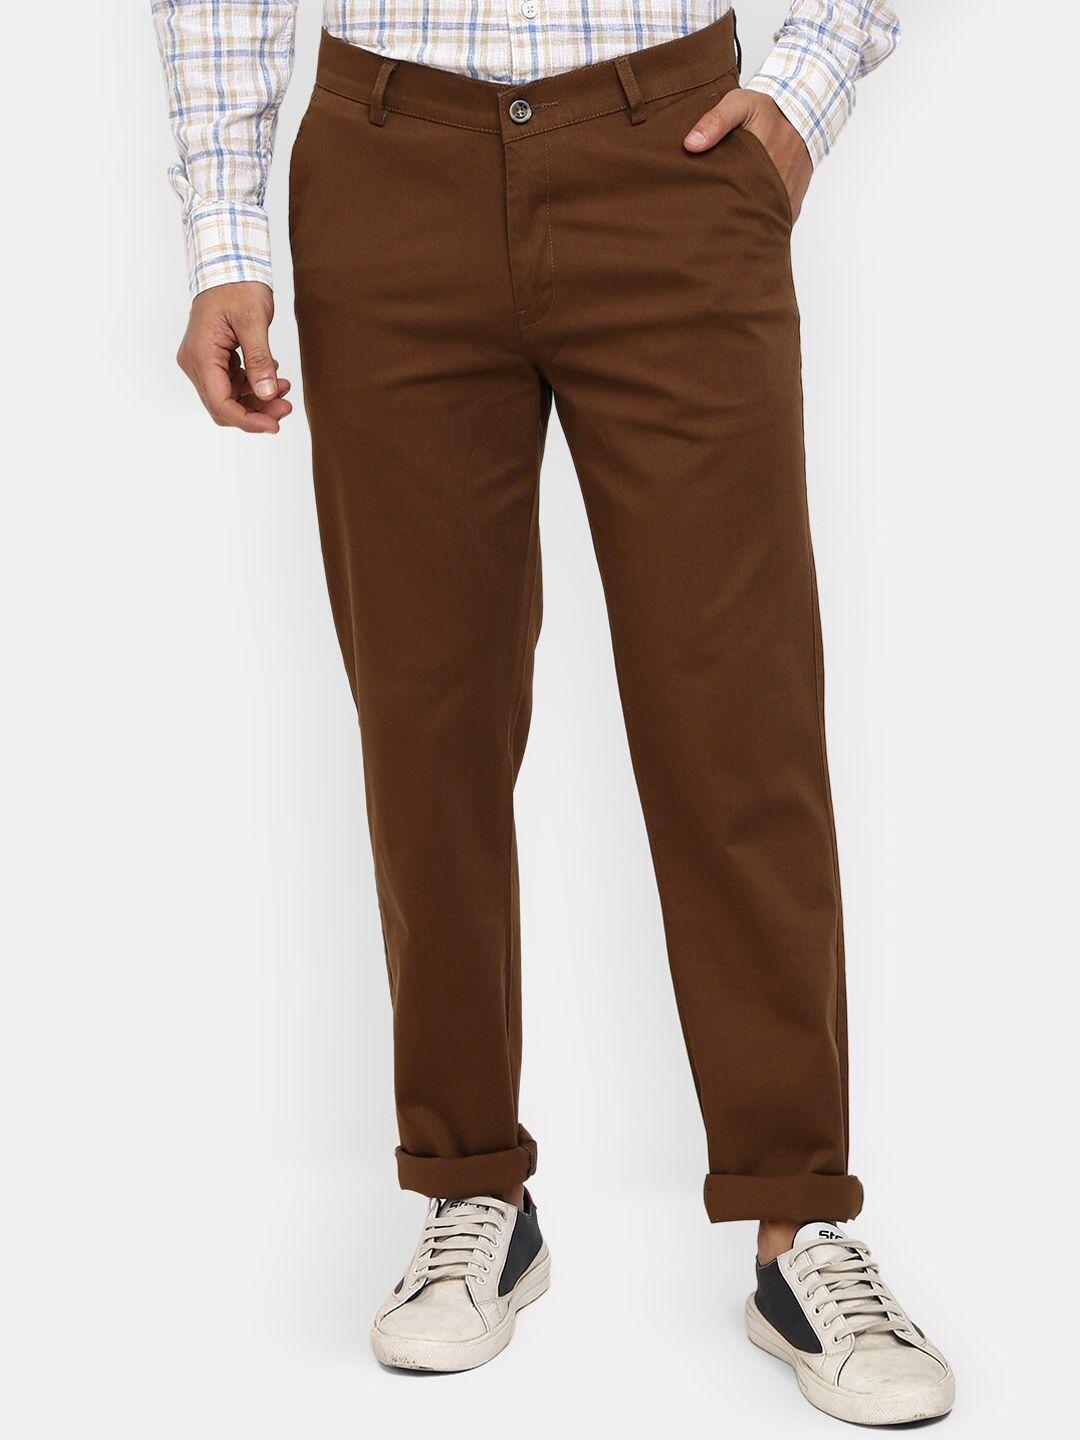 v-mart-men-brown-solid-classic-cotton-slim-fit-trousers